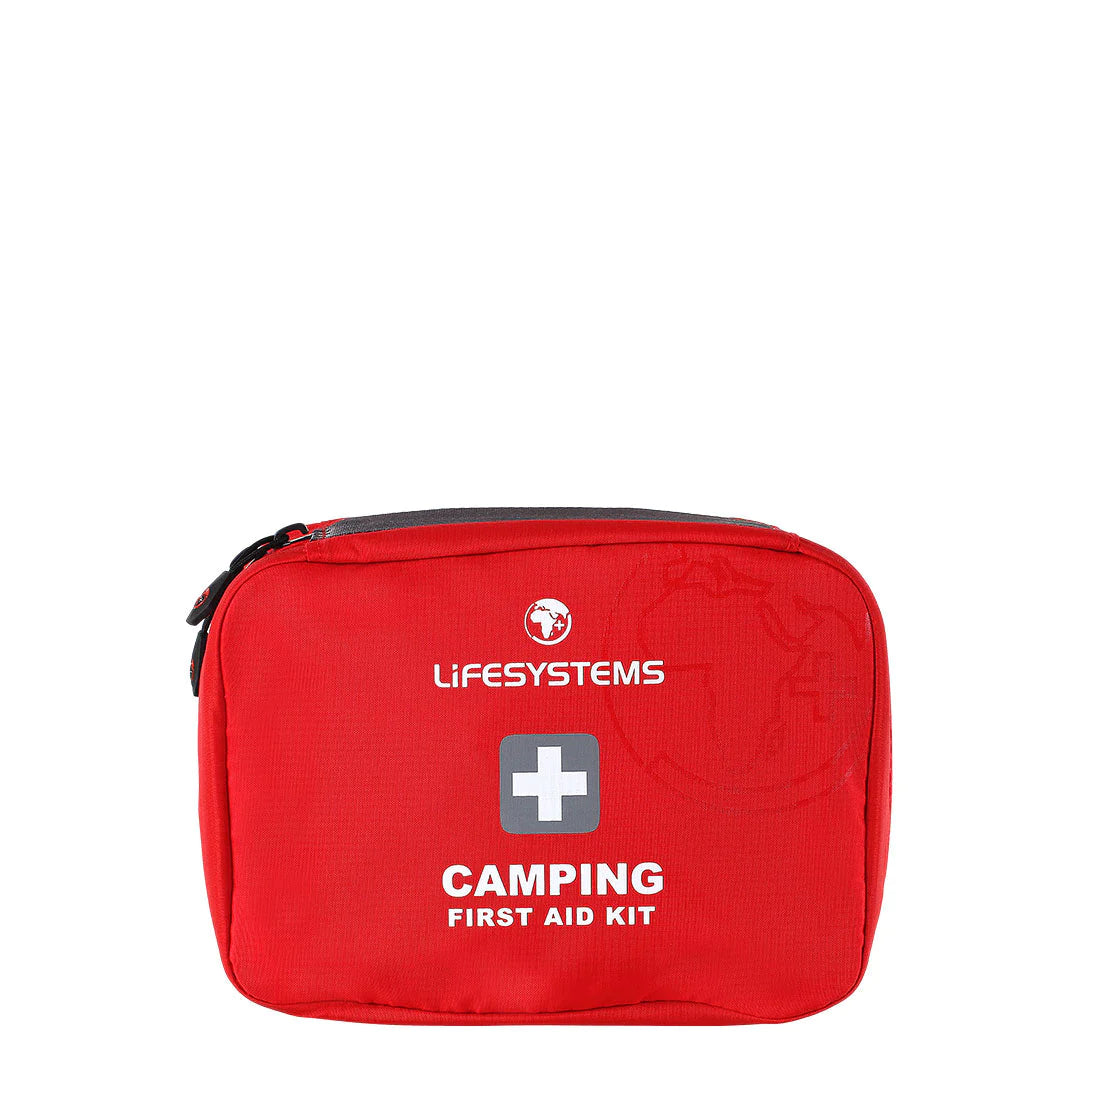 Lifesystems Camping First Kit